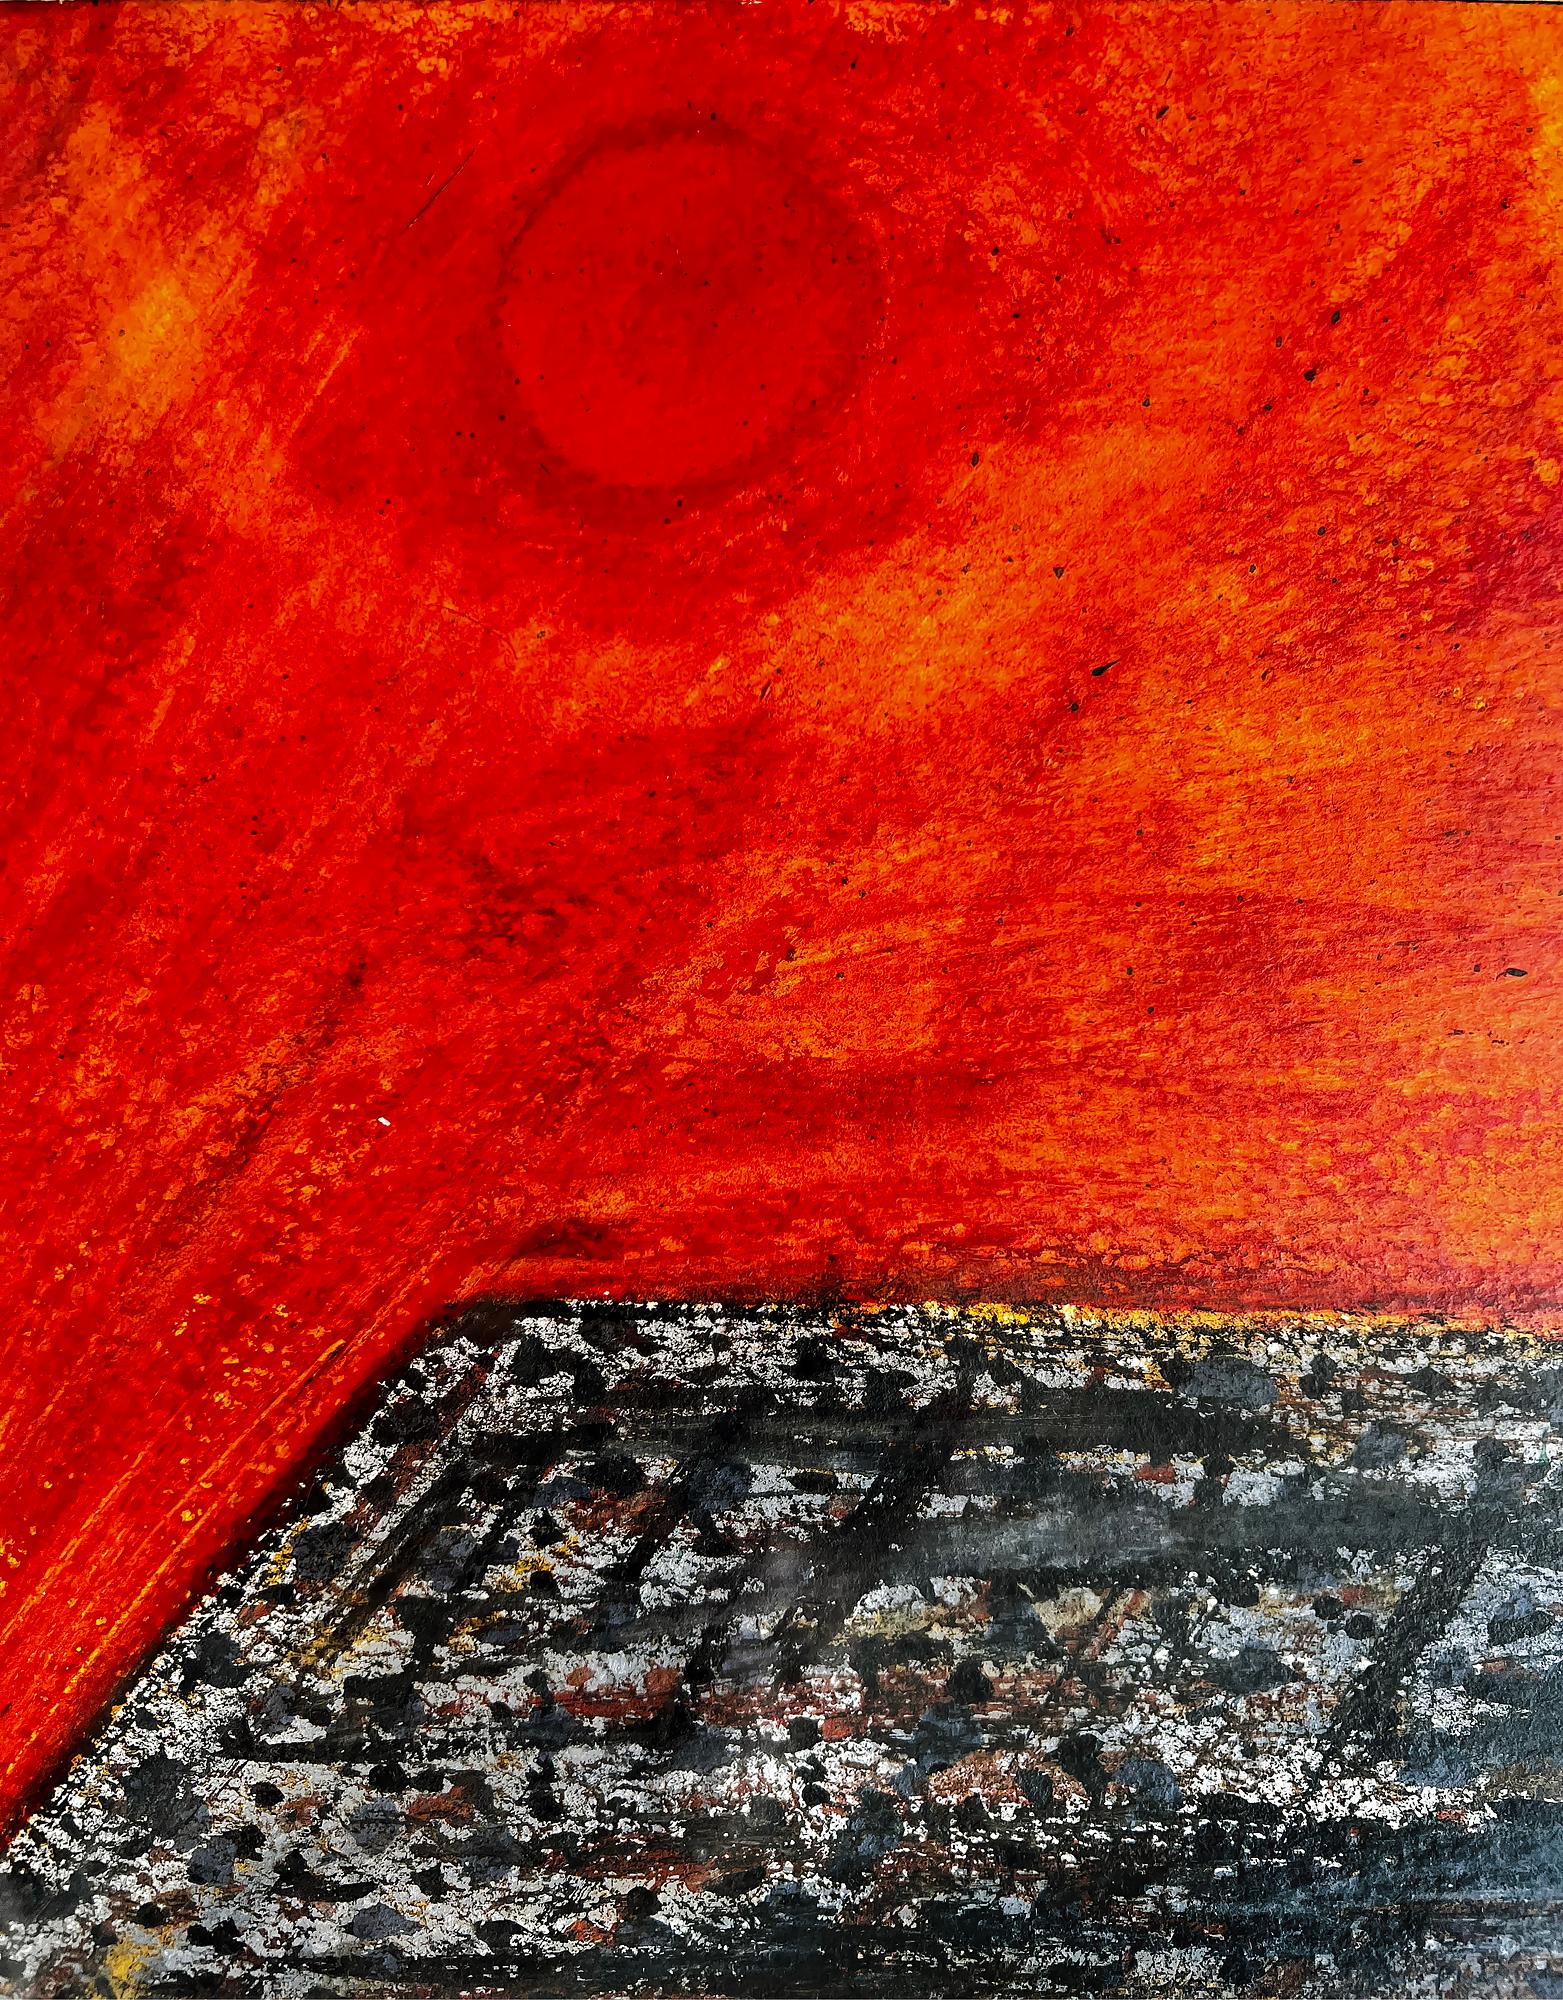 Home, African Village Scene Orange Sky, African American Artist - Painting by  Vincent D. Smith